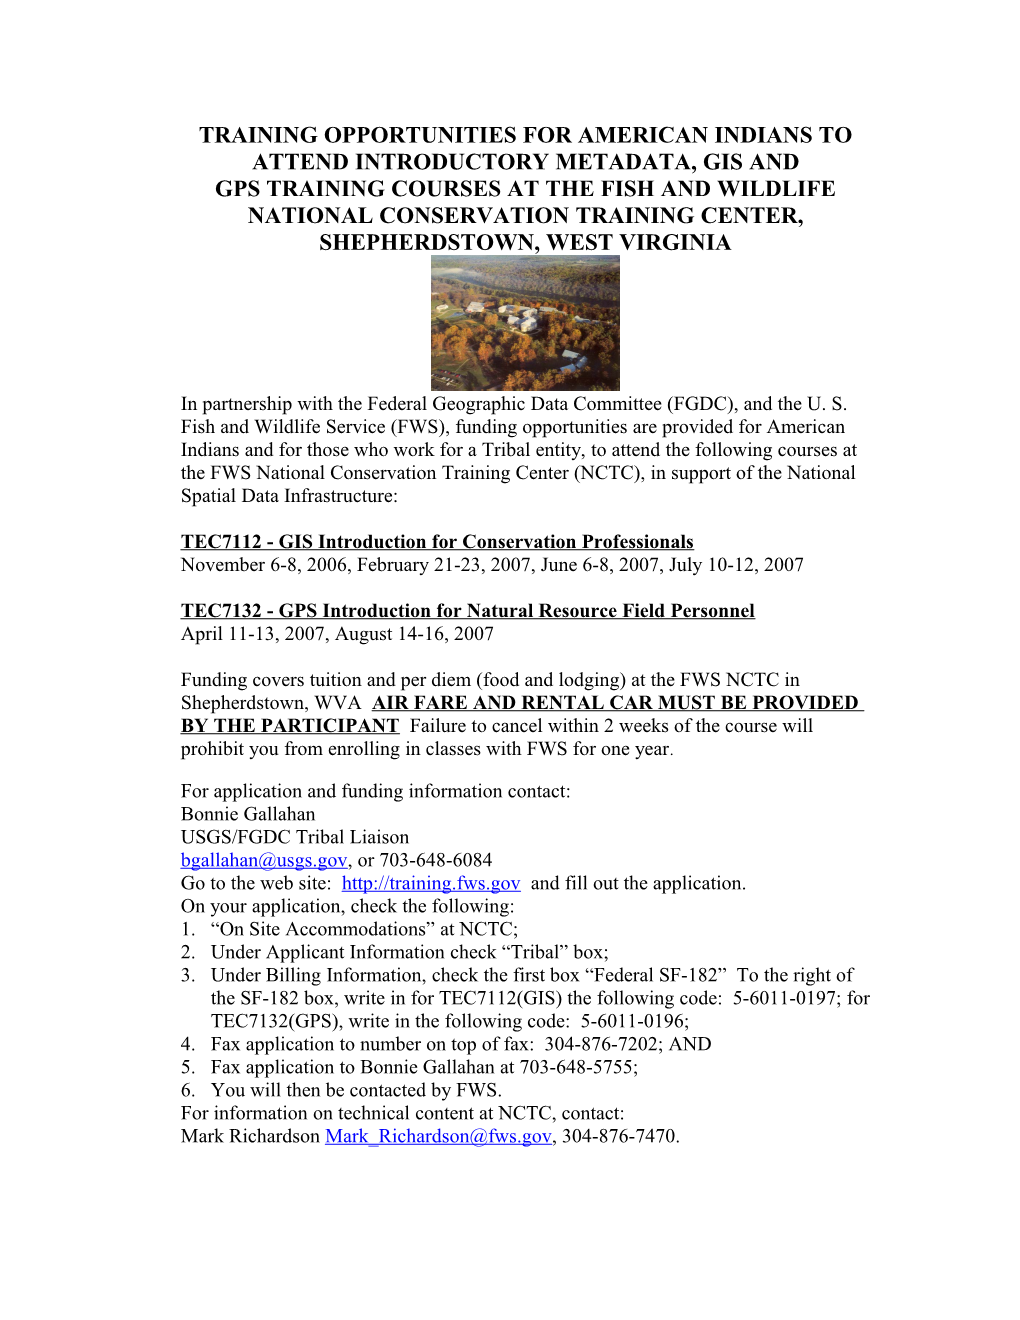 Opportunities for American Indians to Attend Introductory Gis And/Or Gps Training Courses